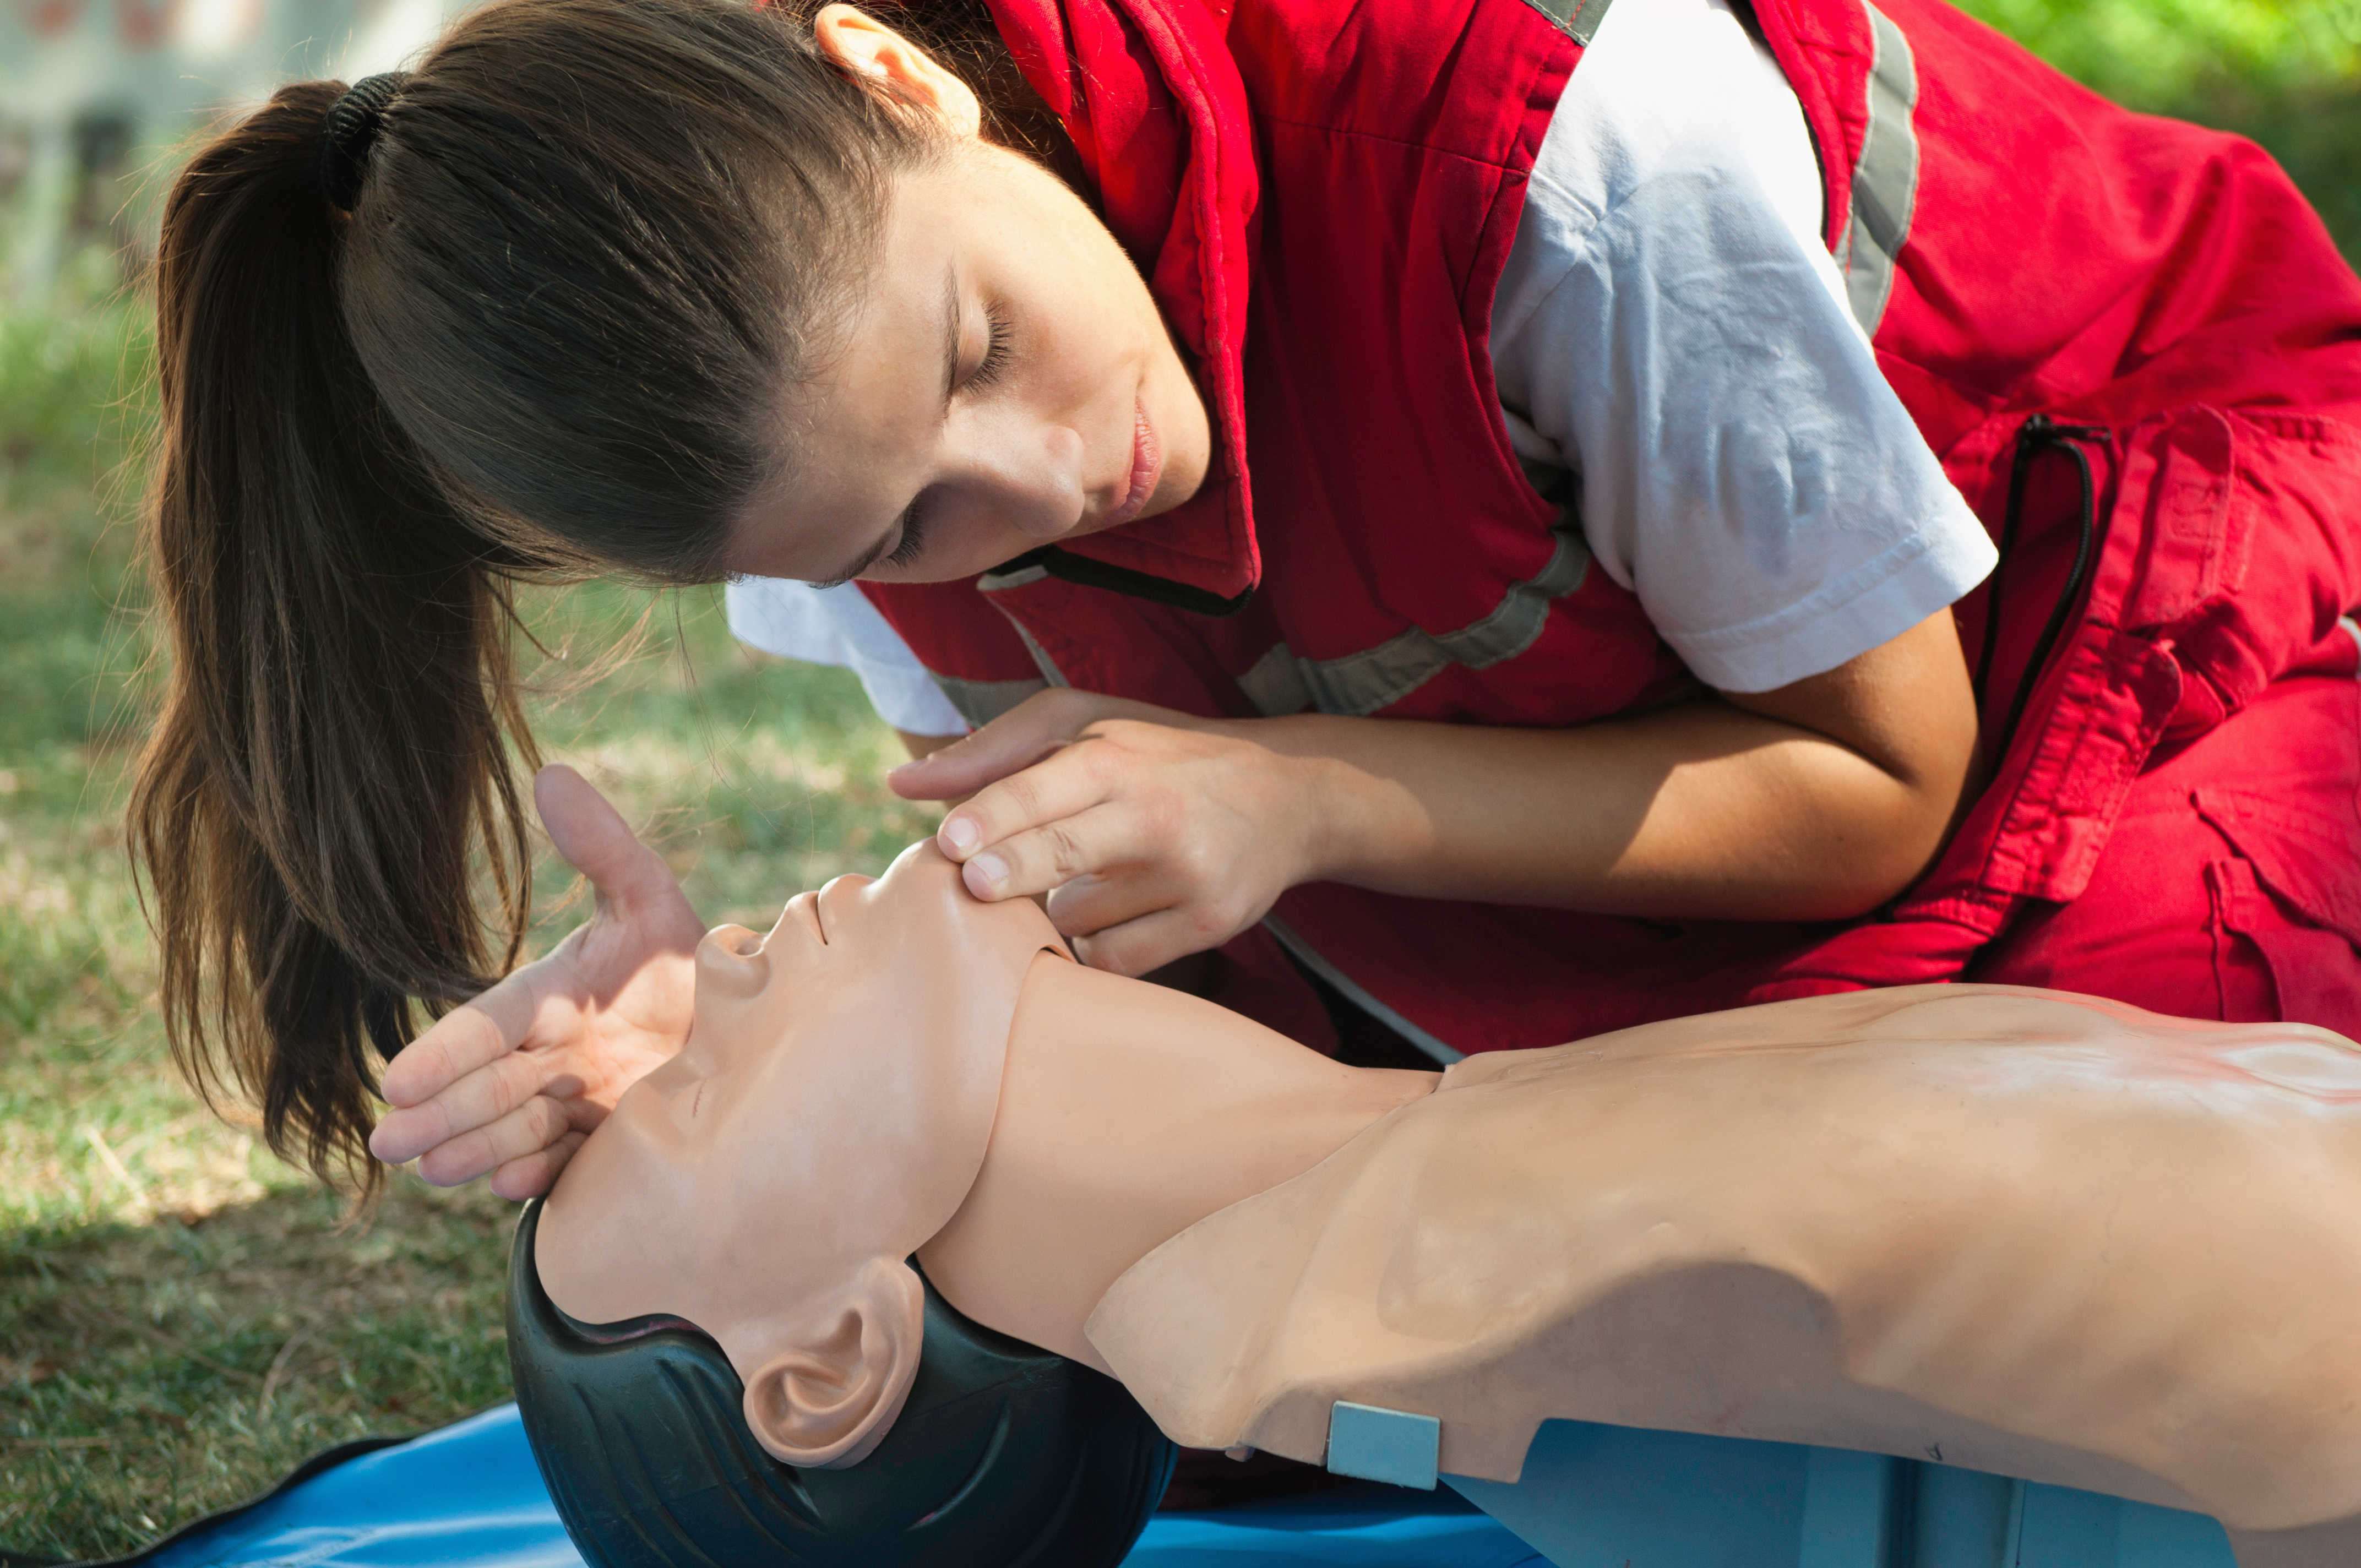 CPR AED First Aid Training Class May 6, 2023 in Salem